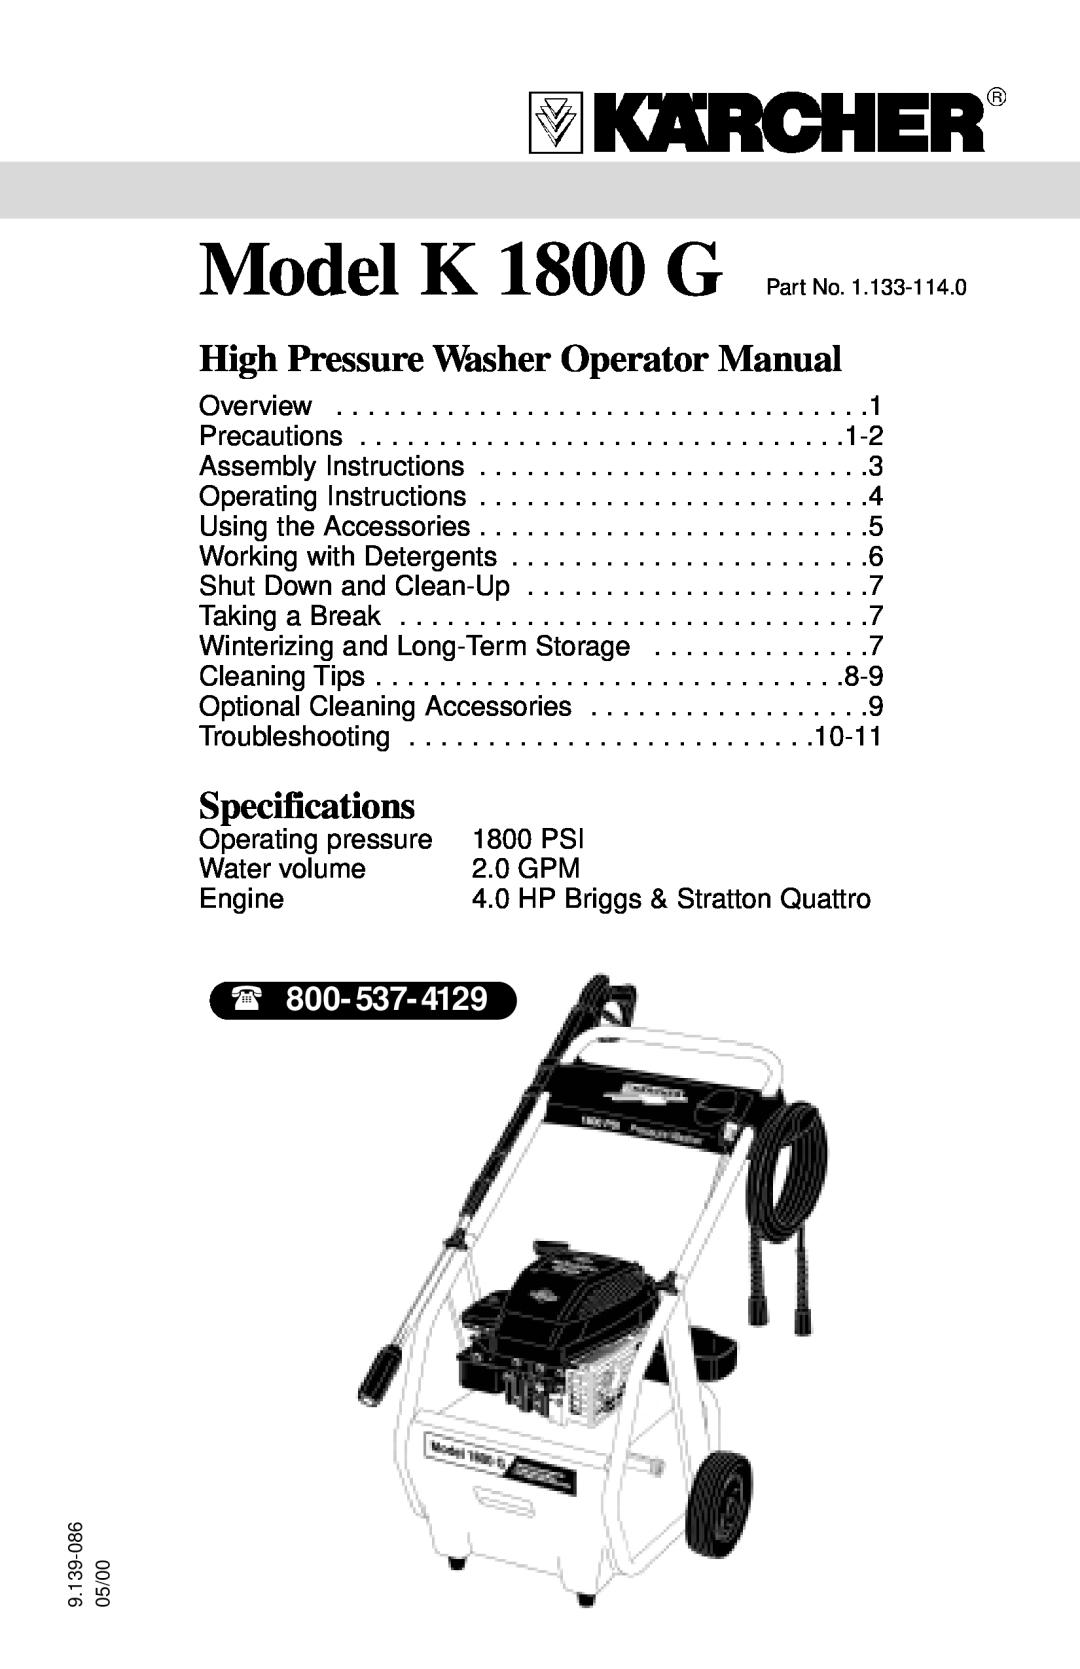 Karcher 1800 specifications High Pressure Washer Operator Manual, Specifications 